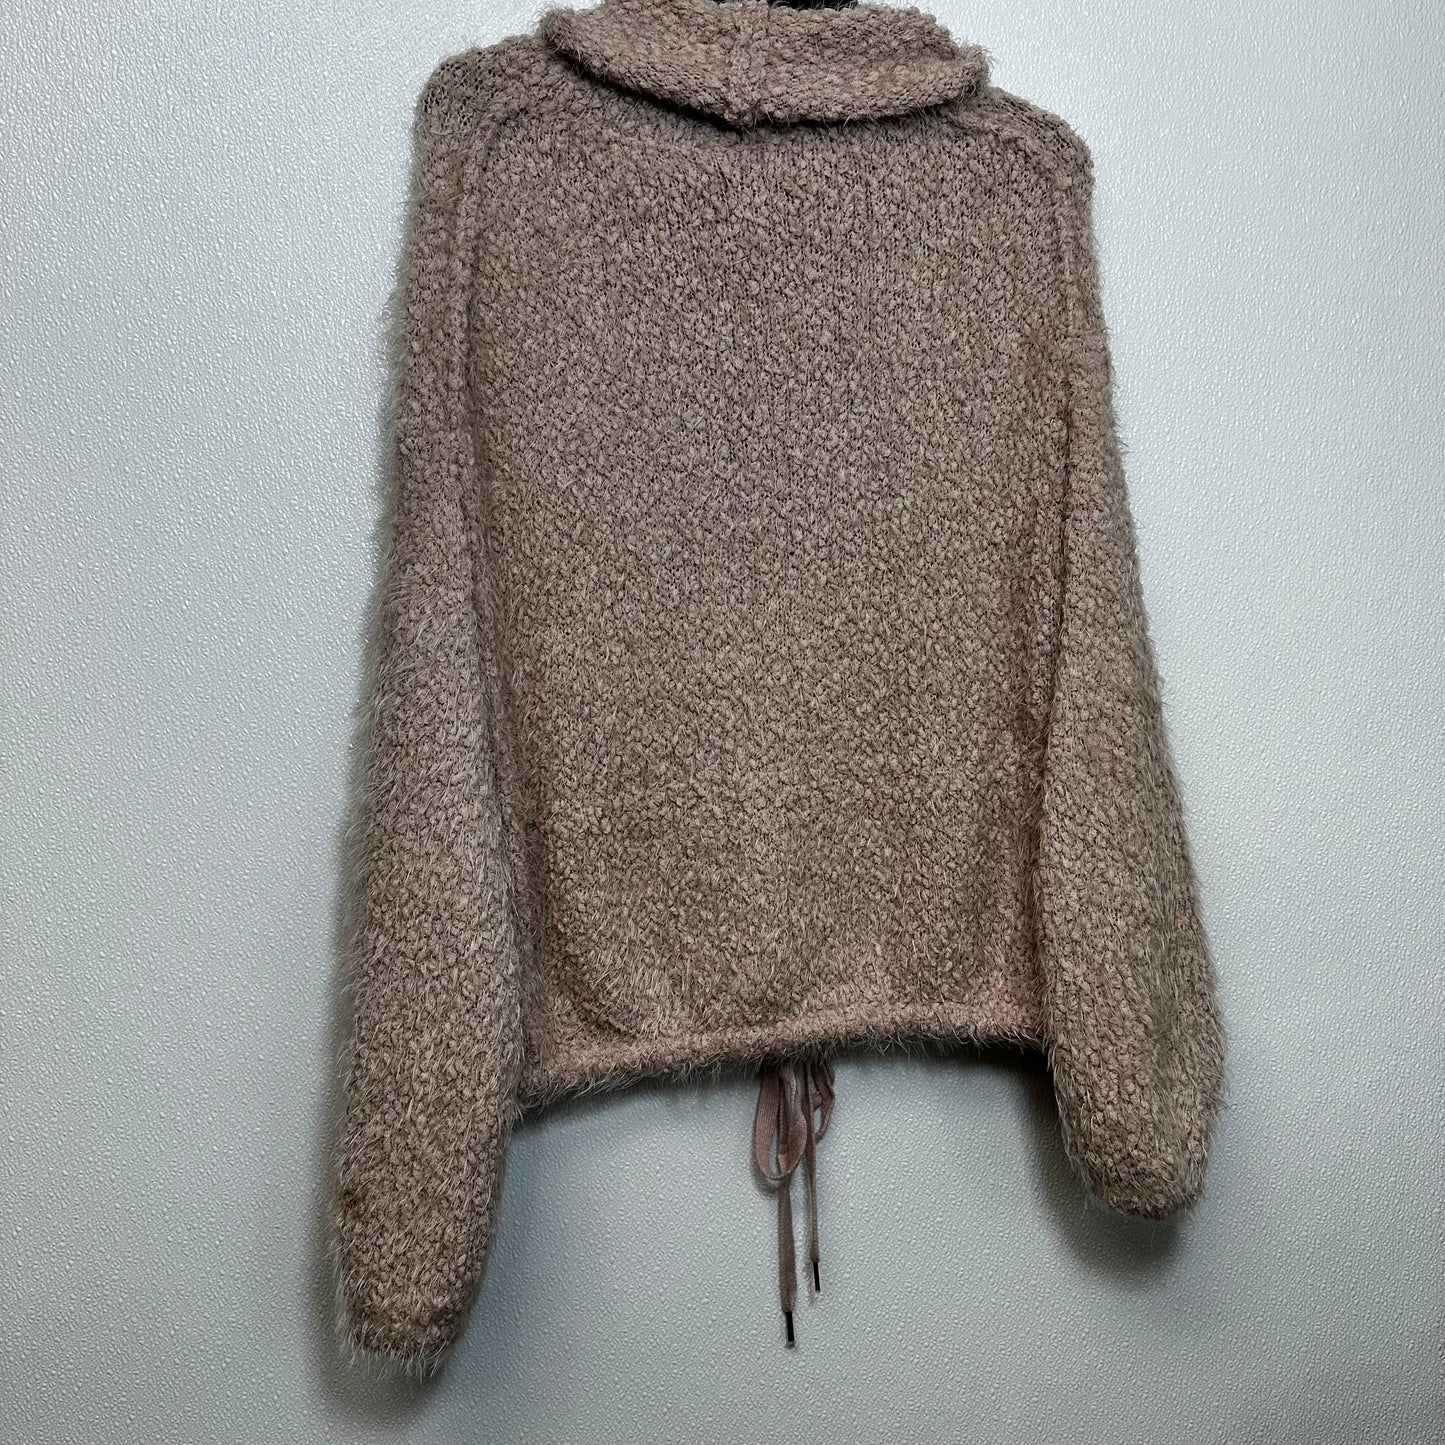 Dusty Pink Sweater Free People, Size S